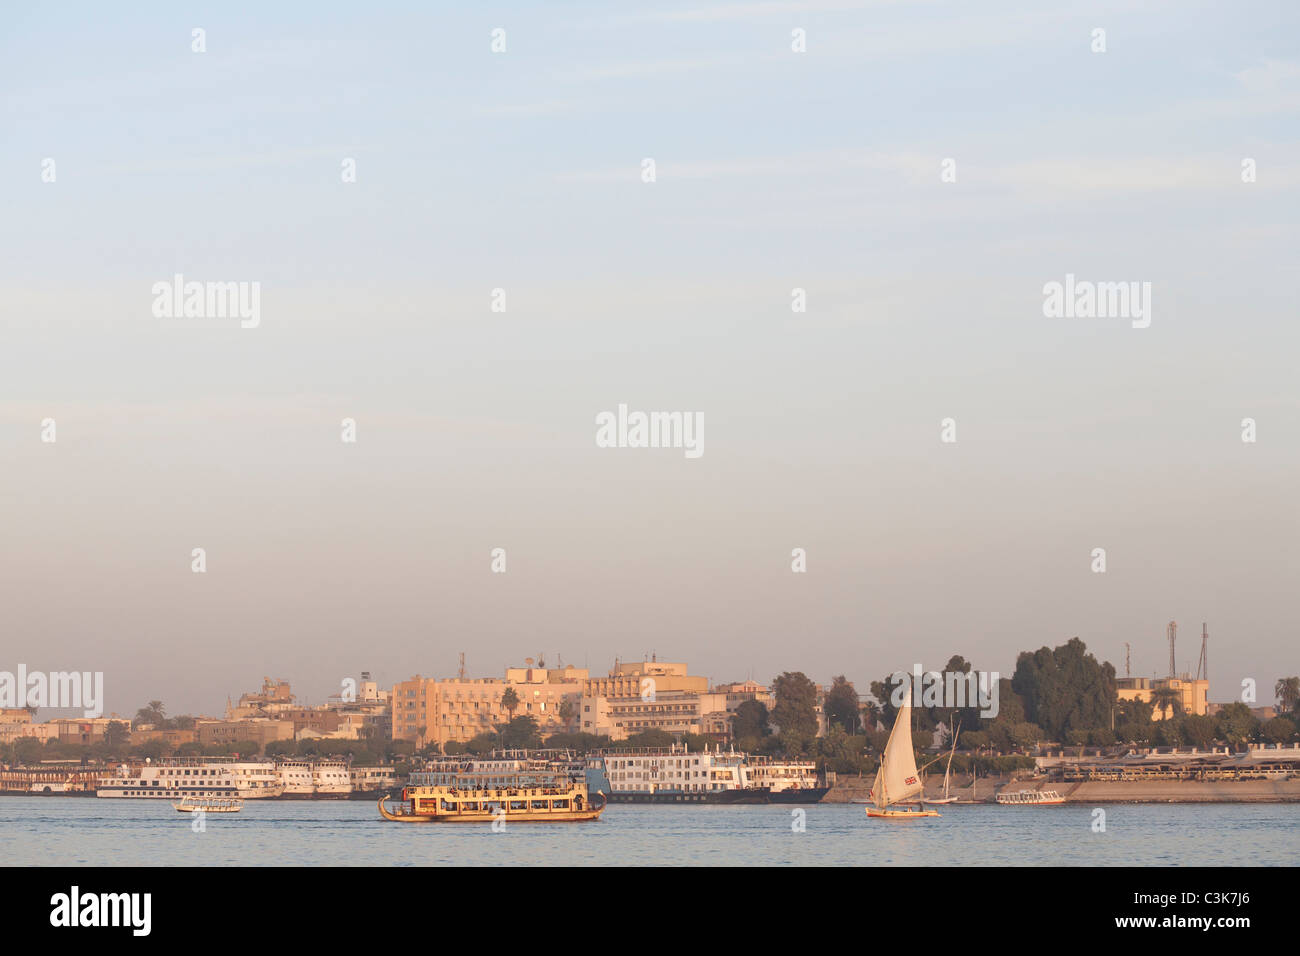 Felucca, local ferry and cruise boats sailing on the River Nile at sunset, Luxor, Egypt, North Africa Stock Photo